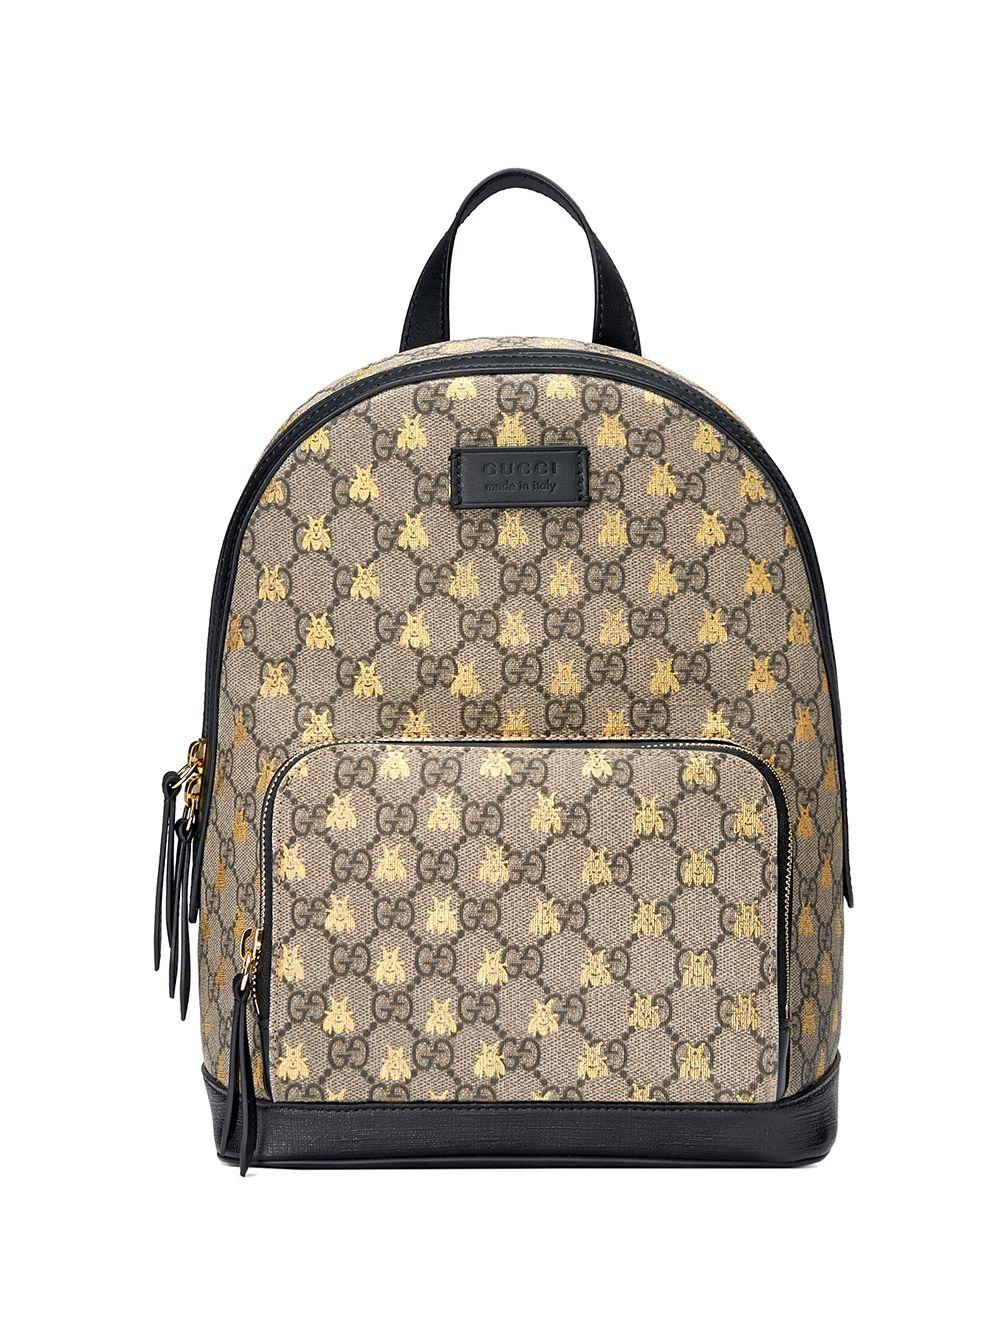 Gucci Canvas Gg Supreme Bees Backpack 